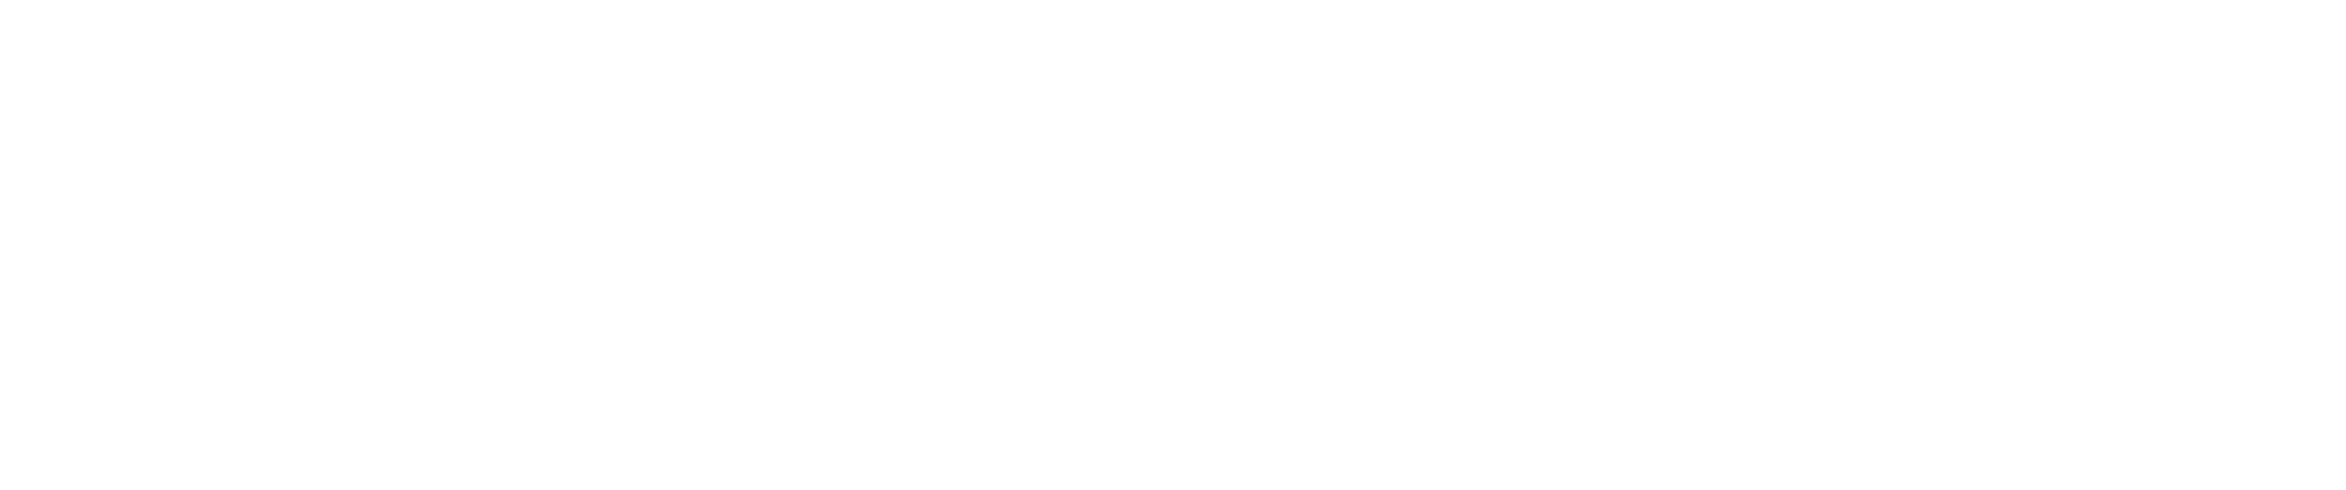 eagle point software